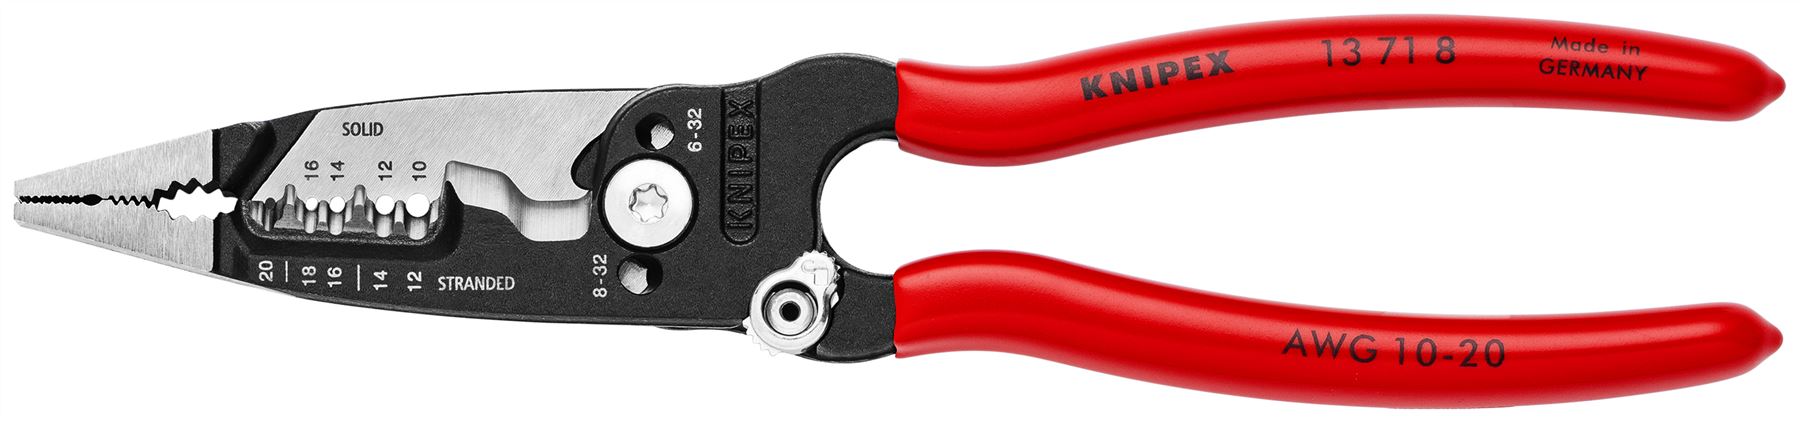 Knipex Wire Stripper Multifunction Electrician Pliers American Style 13 71 8